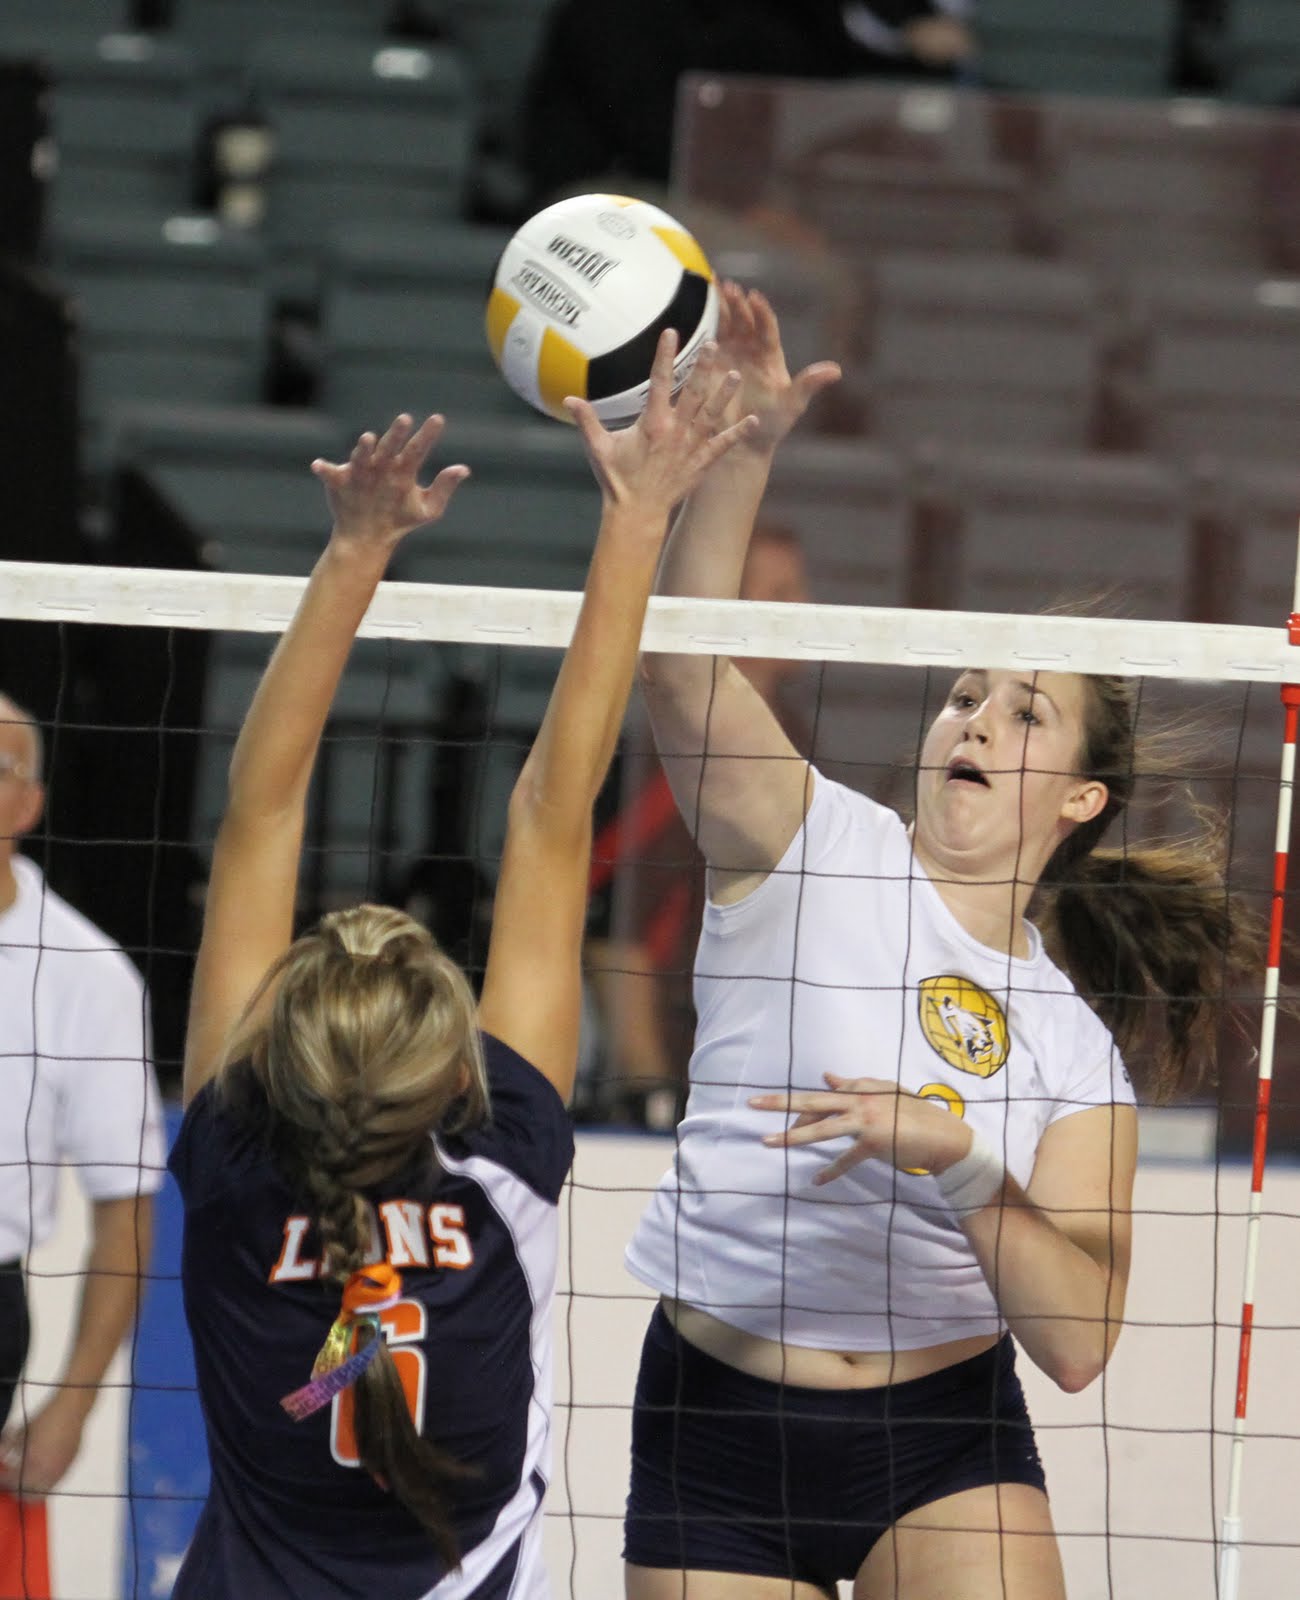 Wncc Cougar Athletics Wncc Volleyball Opens National Tourney With Sweep Over Wallace State